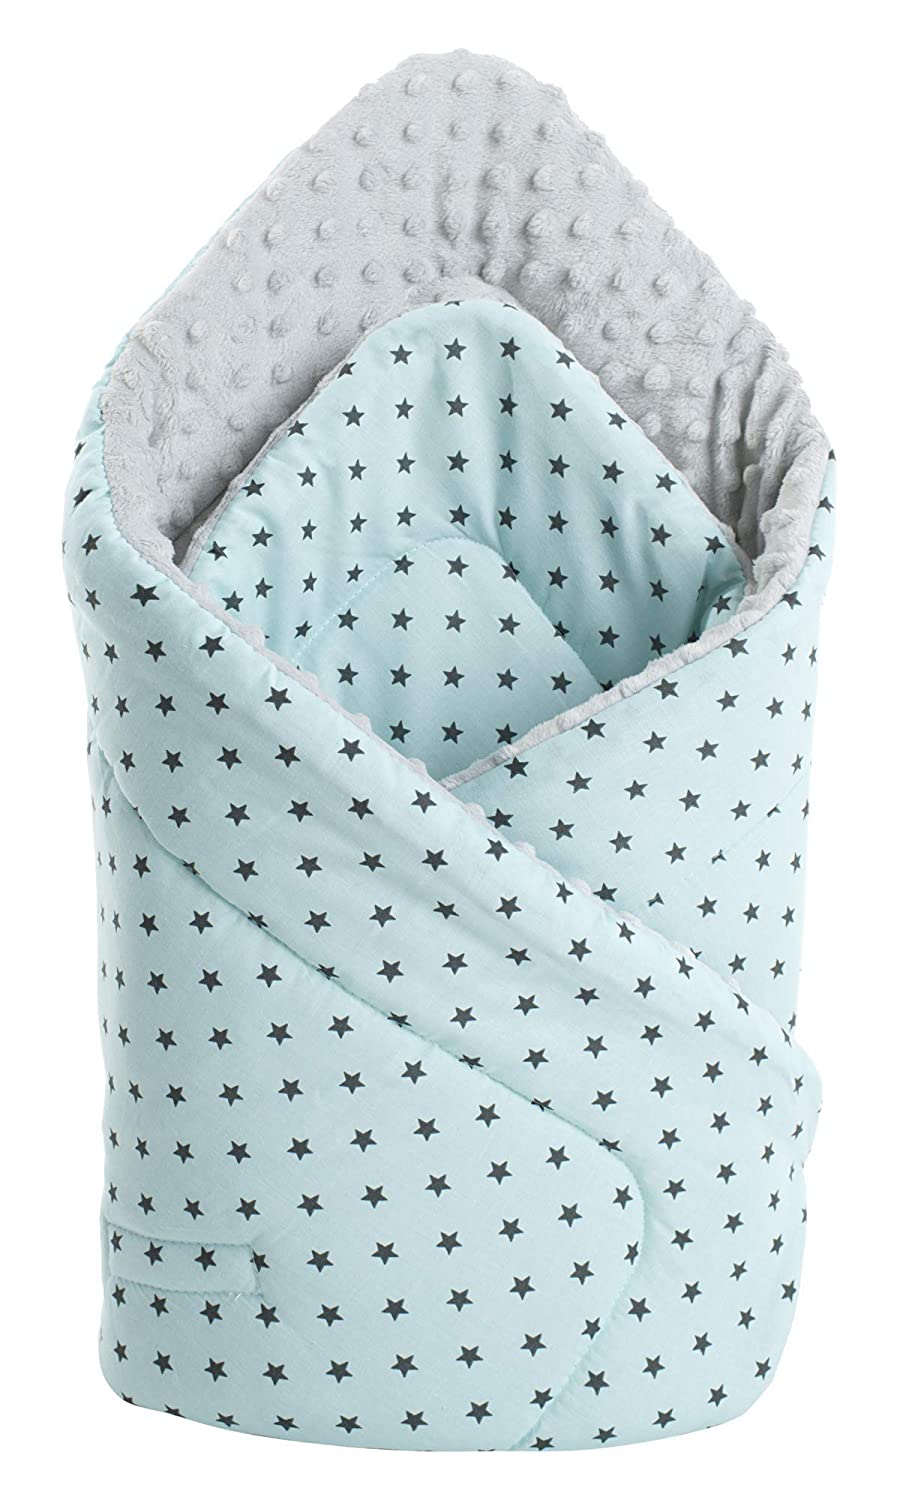 Minky Swaddling Blanket 100% Cotton 75 X 75 Cm Baby Pillow Double-Sided Sof